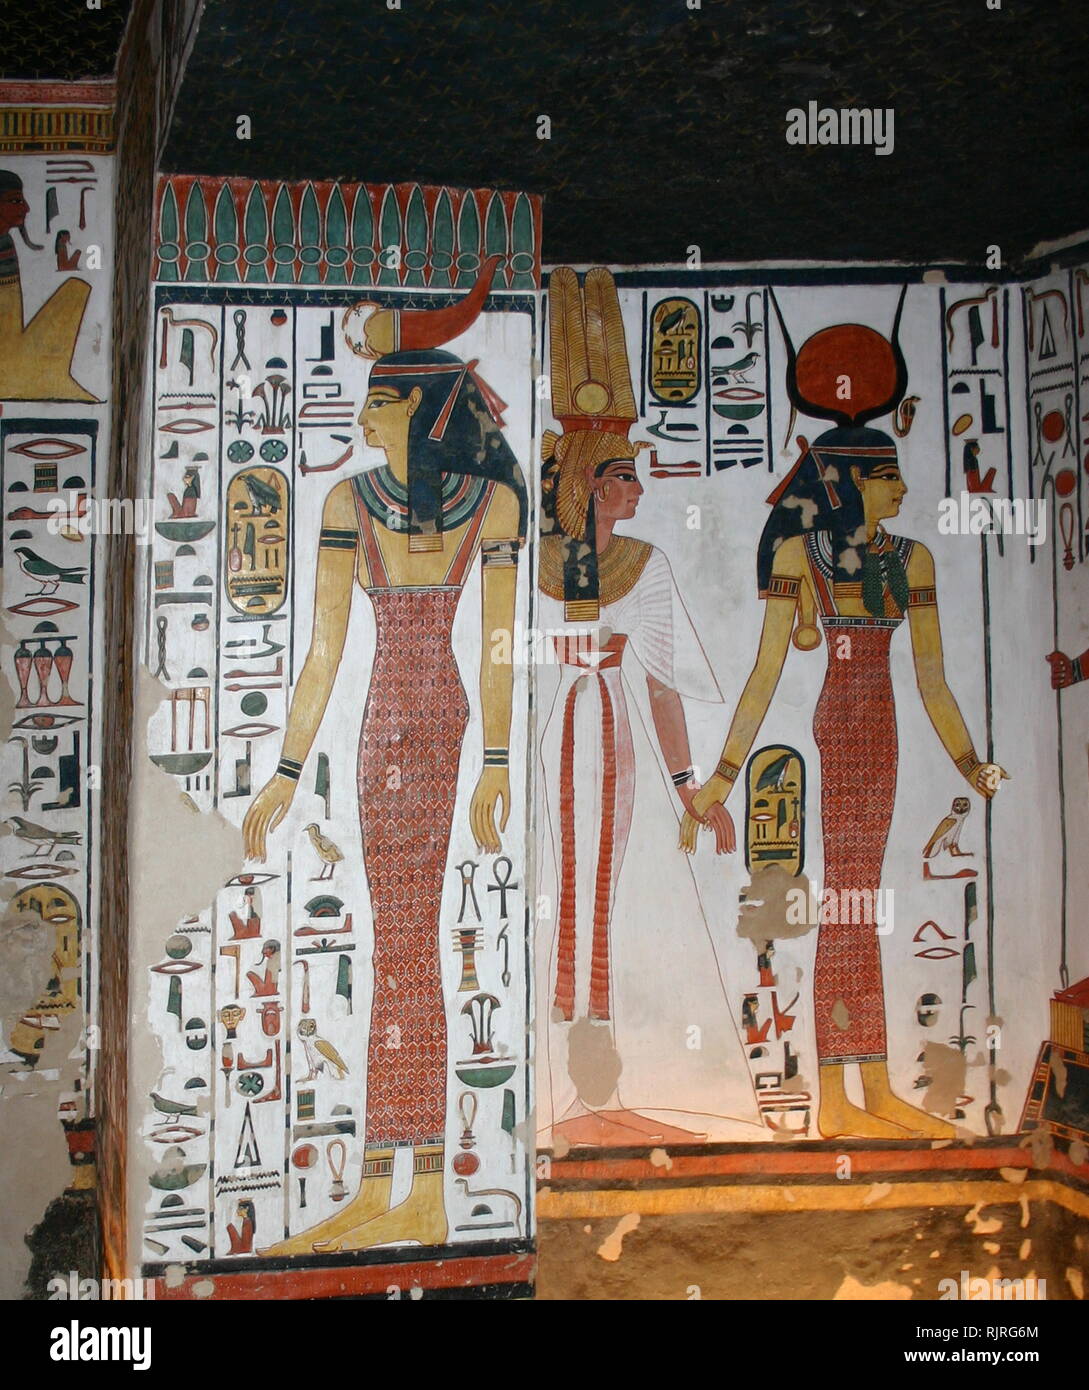 Wall Painting depicting, the Goddess Isis with Nefertari, Great Wife of Pharaoh Ramesses II, Inside the tomb (QV66) of Nefertari, in Egypt's Valley of the Queens. It was discovered by Ernesto Schiaparelli in 1904. It is called the Sistine Chapel of Ancient Egypt. In the Valley of the Queens, Nefertari's tomb once held the mummified body and representative symbolisms of her, like what most Egyptian tombs consisted of. Now, everything had been looted except for two thirds of the 5,200 square feet of wall paintings. ca. 1255 BC Stock Photo